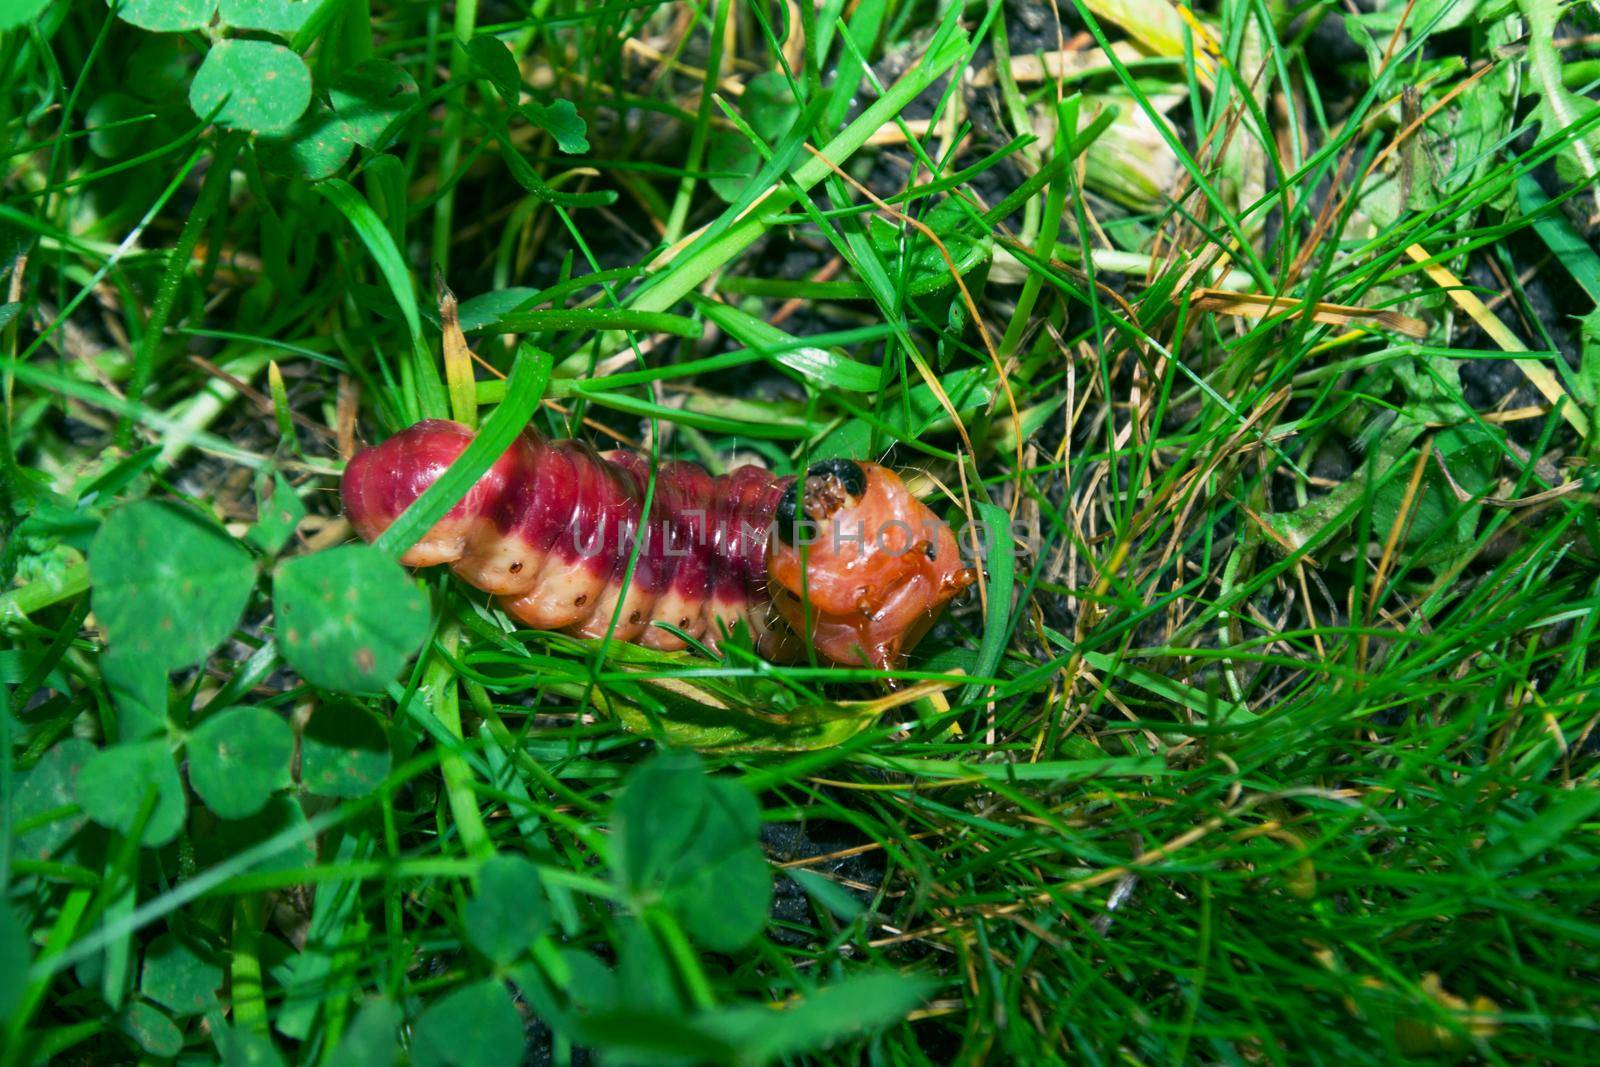 The bright colourful caterpillar creeps on a green grass